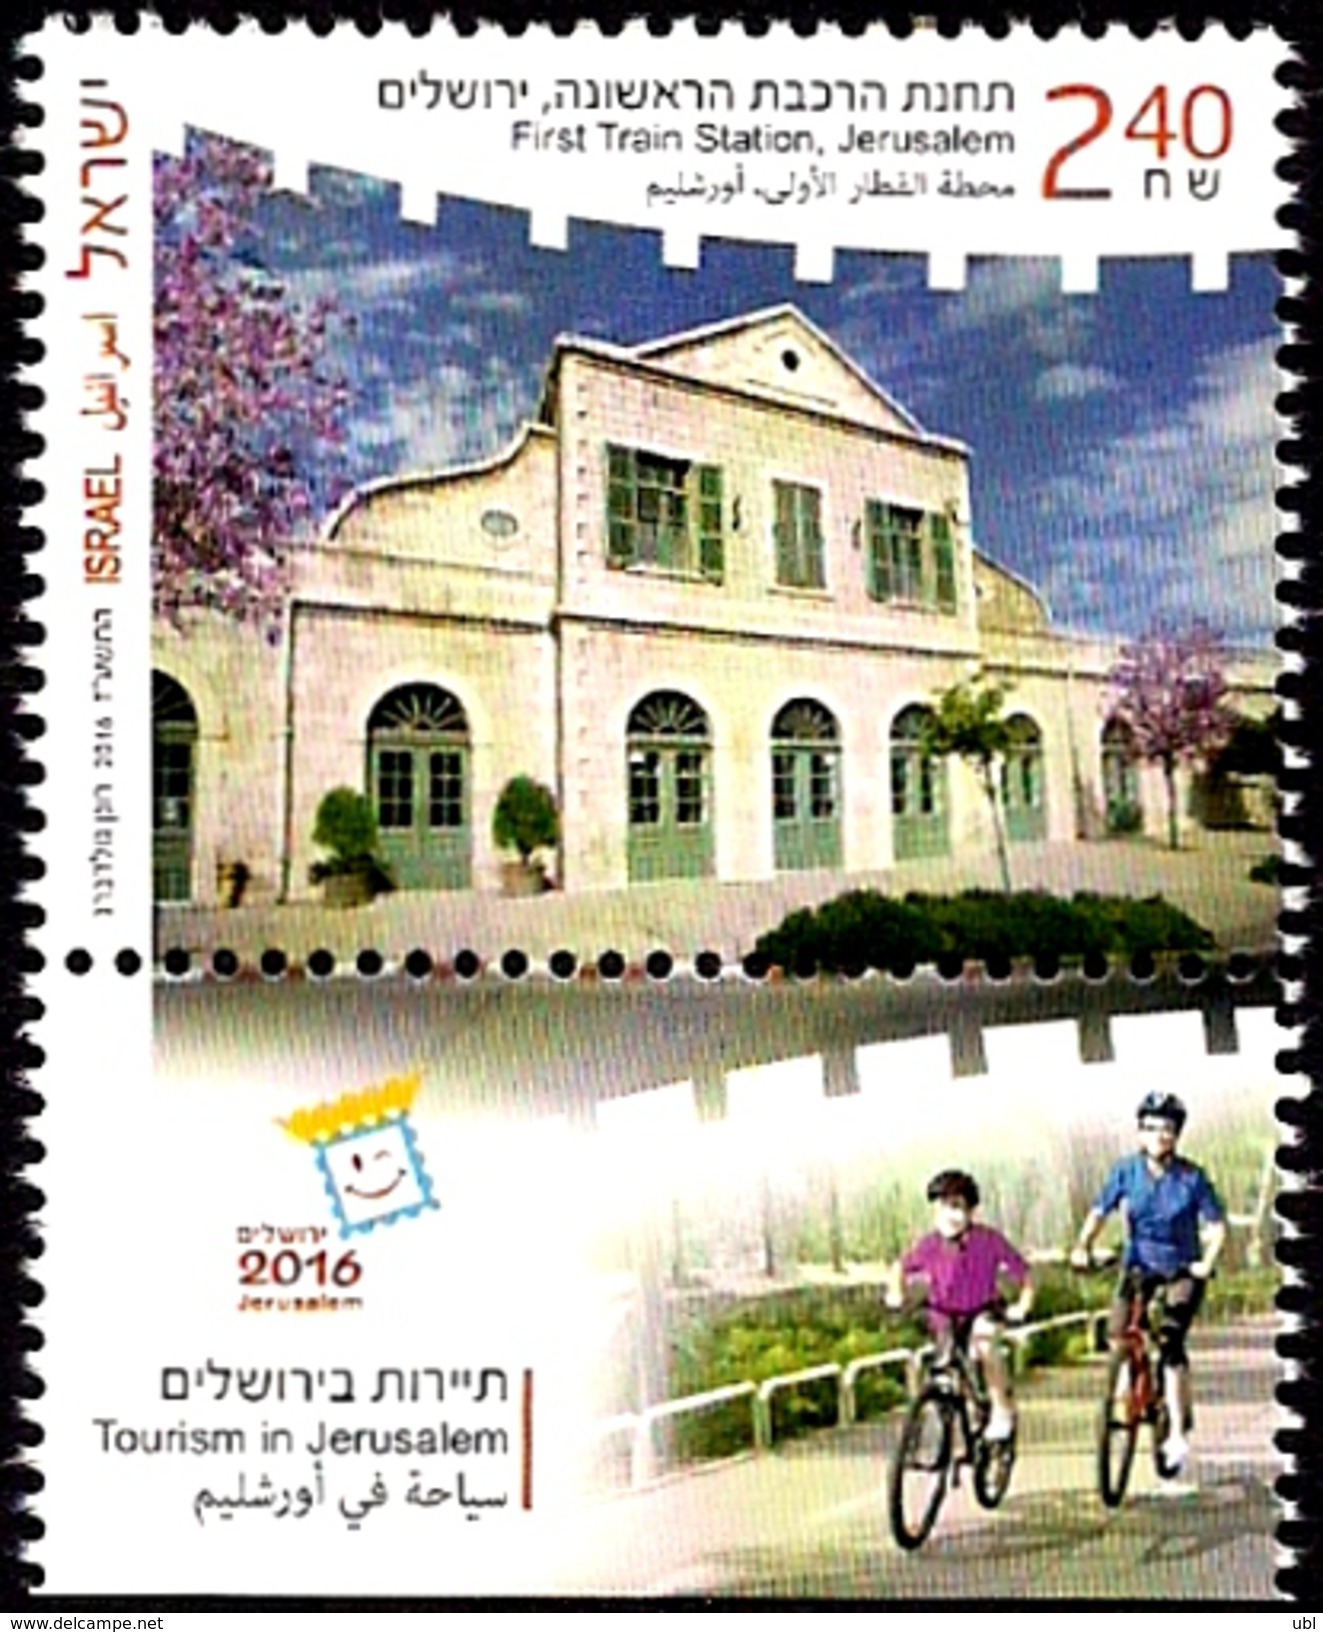 ISRAEL 2016 - "Jerusalem 2016" Stamp Exhibition - The Jerusalem Old Train Station - A Stamp With A Tab - MNH - Monuments